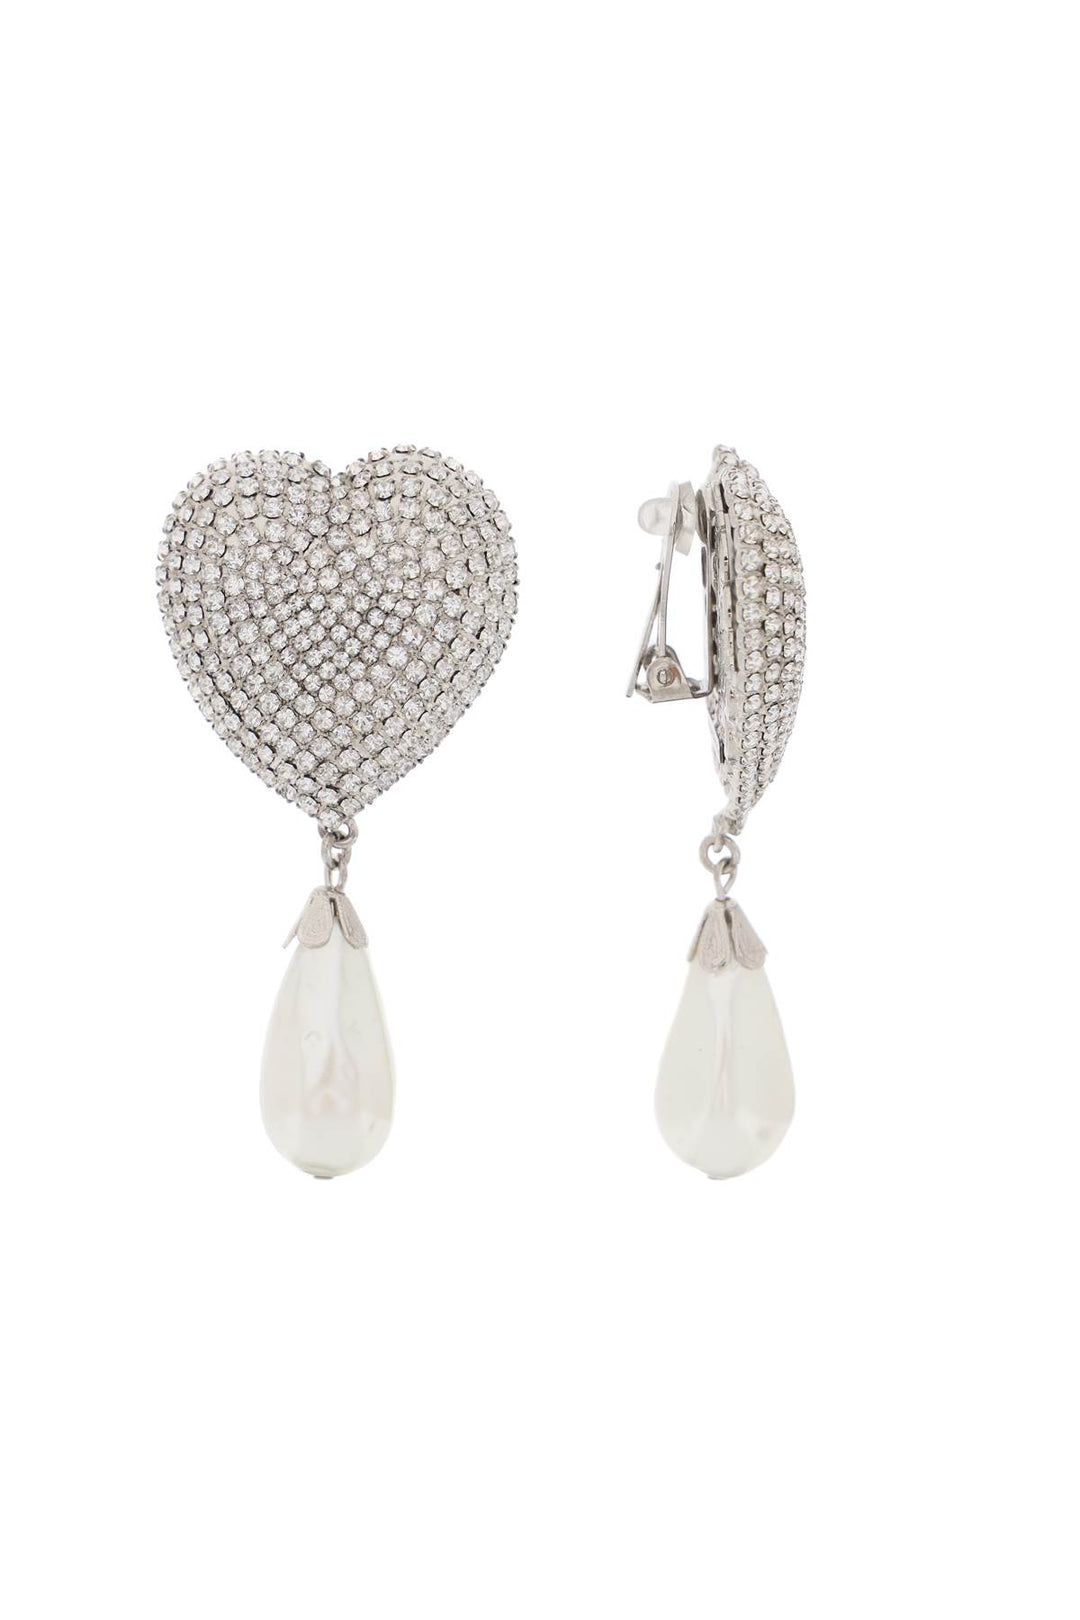 Alessandra Rich Heart Crystal Earrings With Pearls   Argento